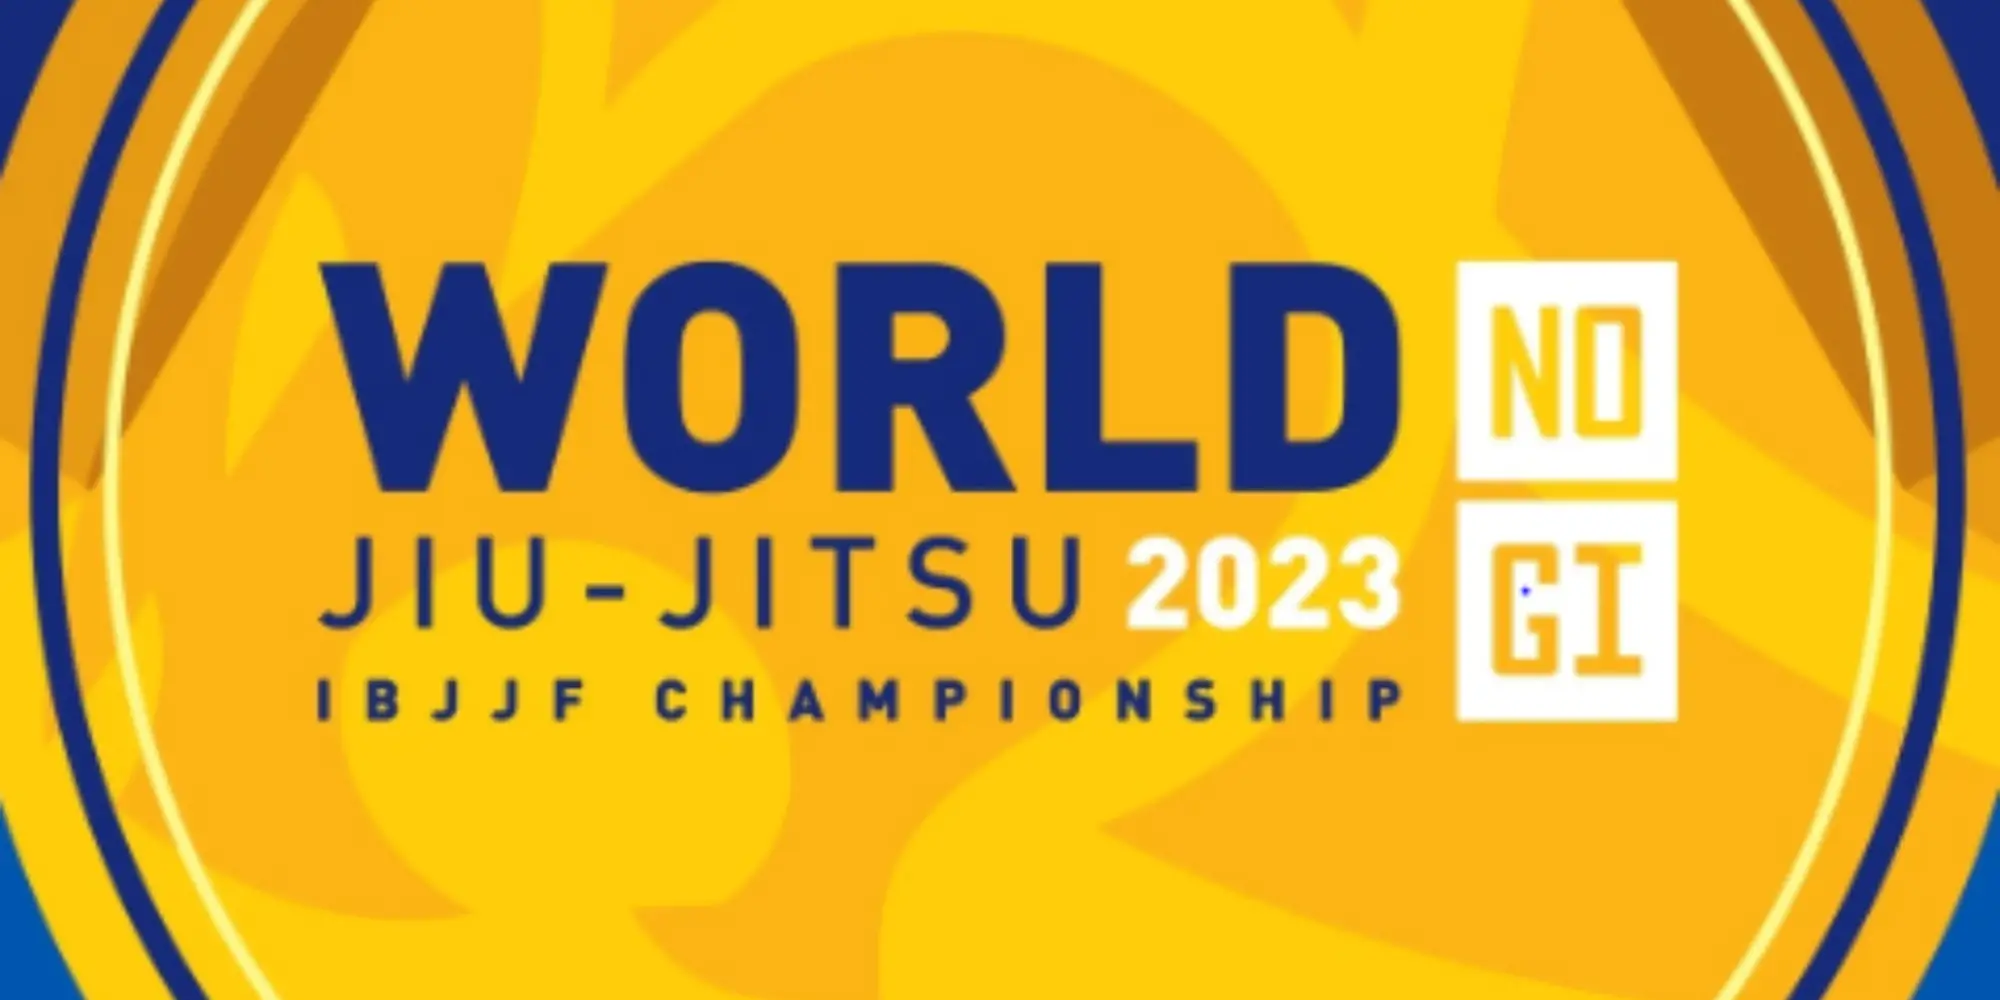 Live IBJJF Worlds 2023 Results: See Who Won On The Final Day